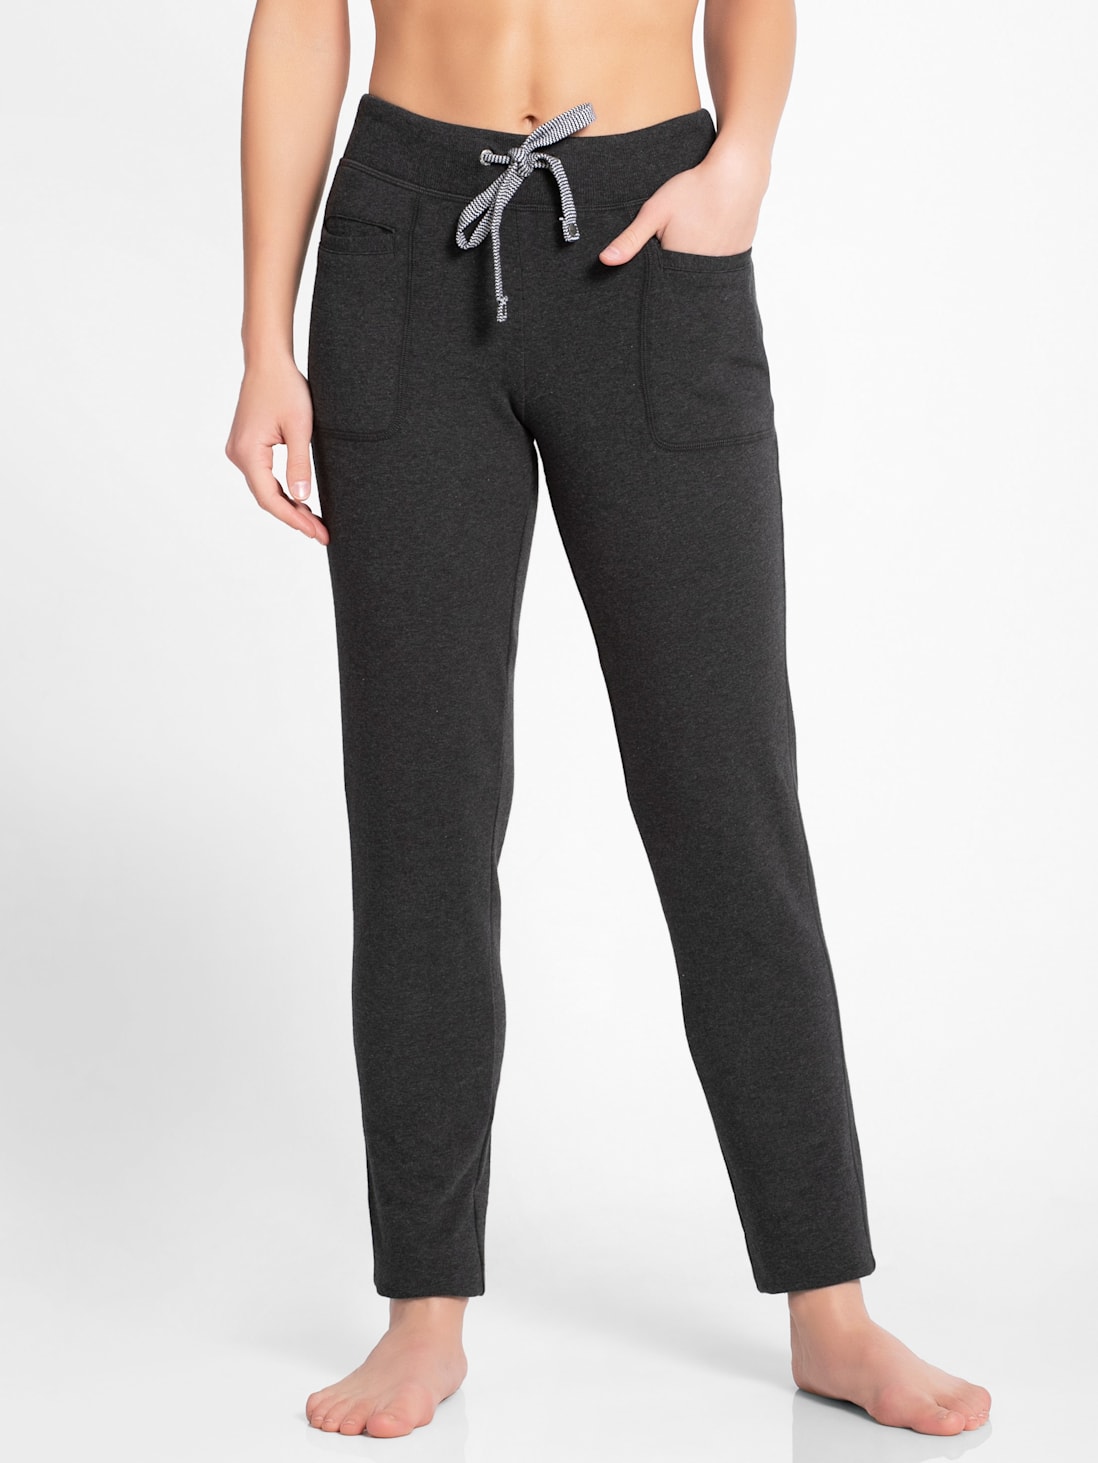 Buy Track Pant for Women with Pocket & Drawstring Closure - Black